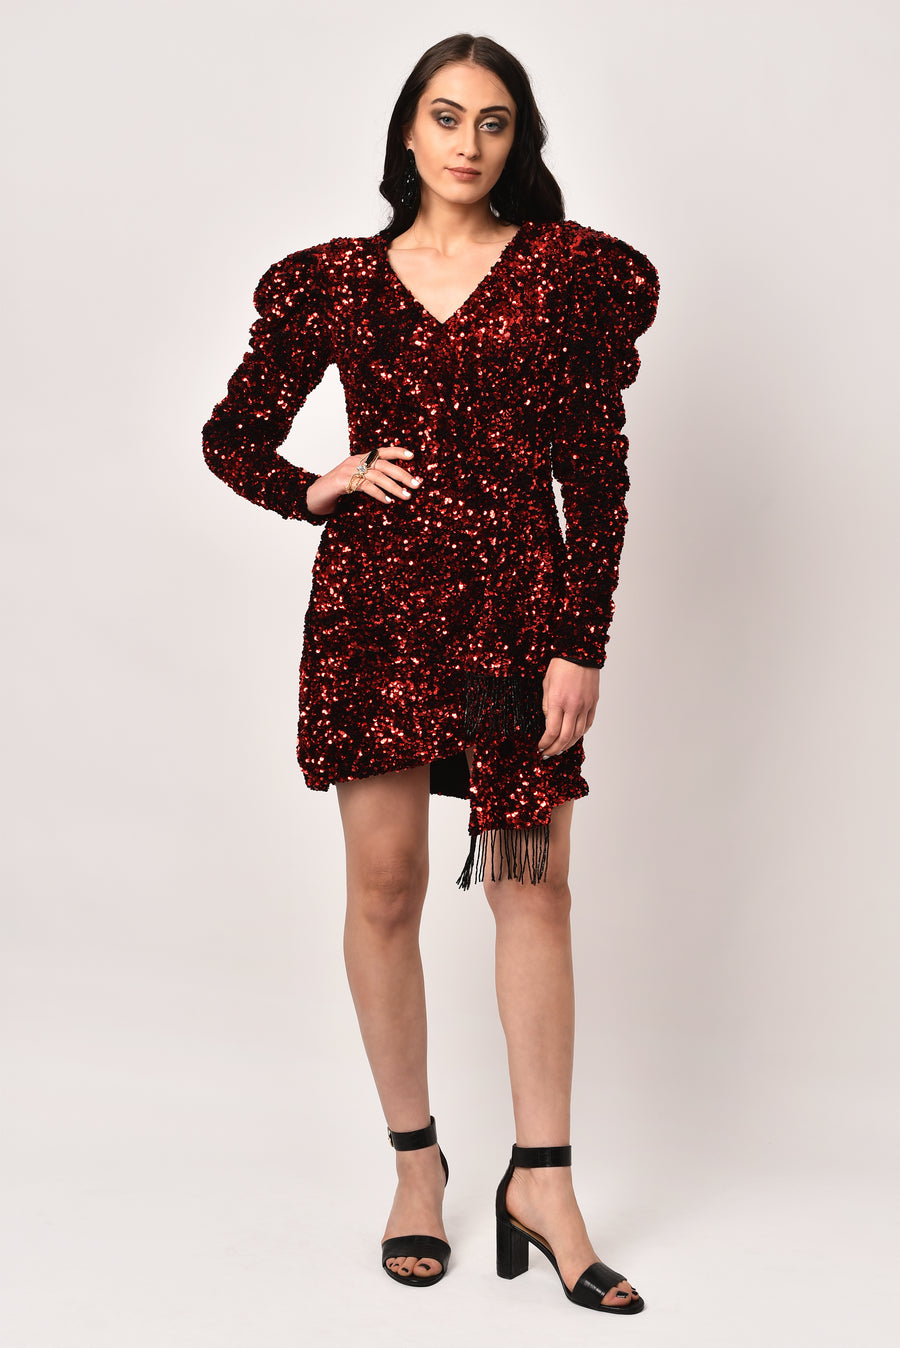 RED DRAPED SEQUIN DRESS